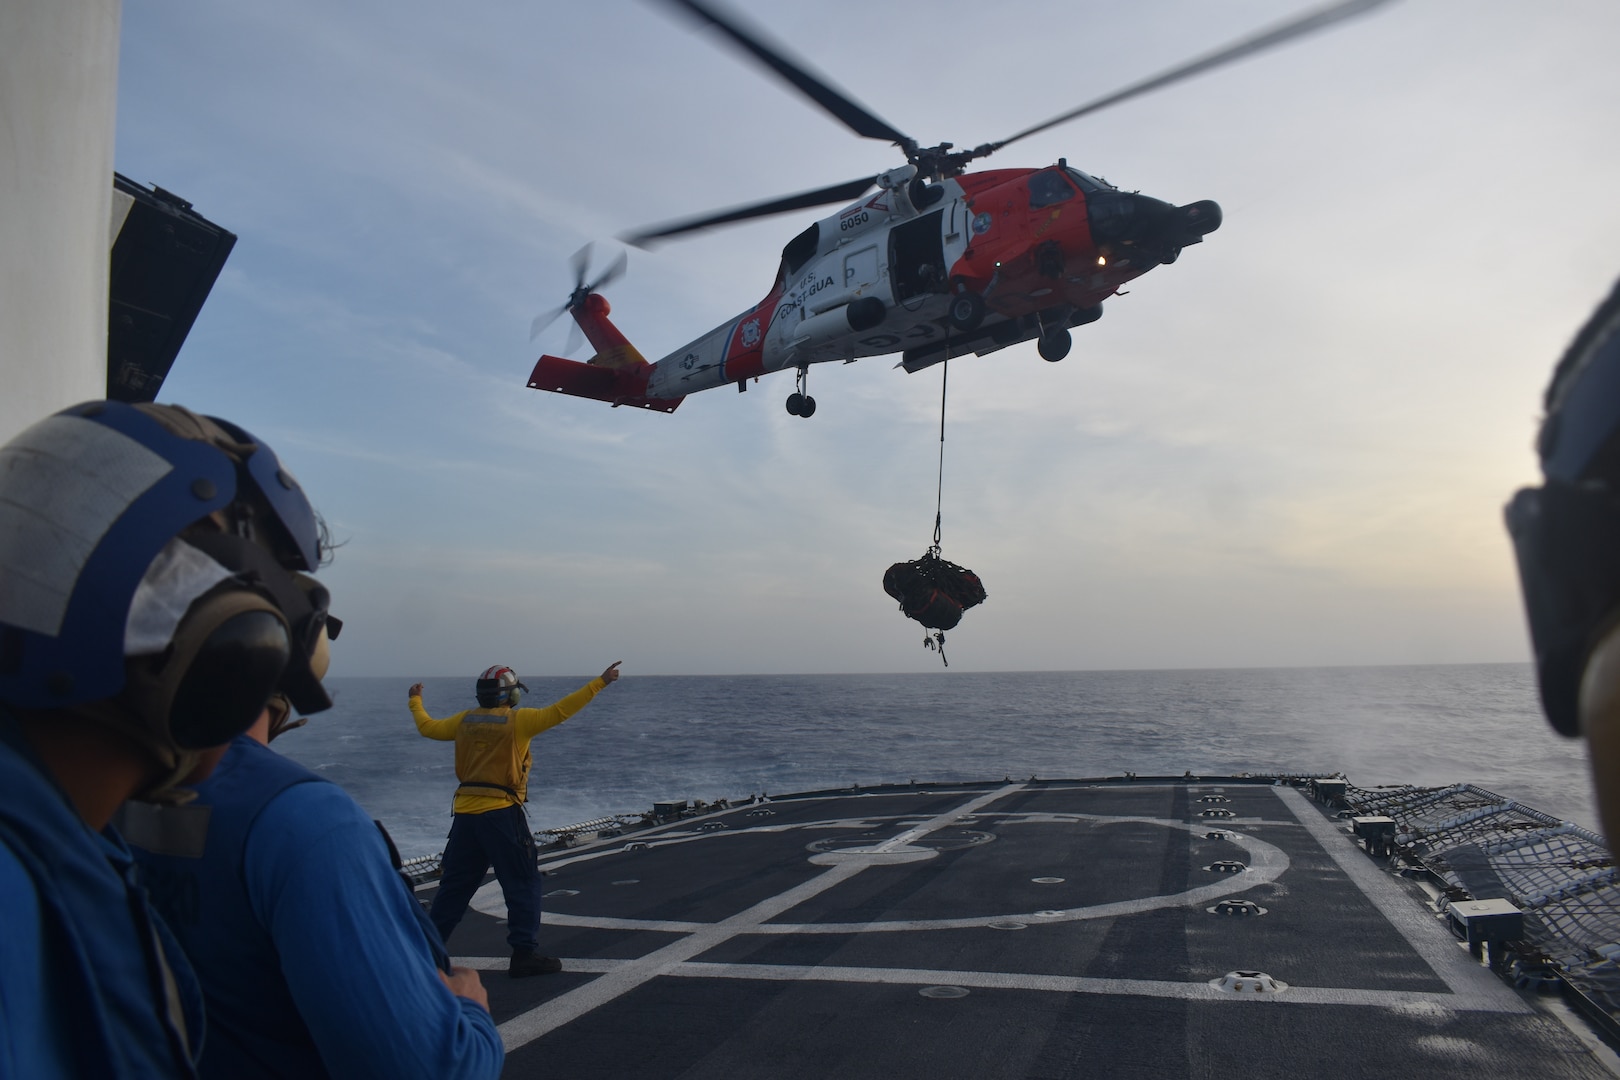 U.S. Coast Guard Ensign Chase Sanders, a landing signal officer assigned to Coast Guard Cutter Resolute (WMEC 620), directs a Coast Guard Jayhawk MH-60 helicopter to hover off Resolute’s port side during a vertical replenishment exercise in the Caribbean Sea, July 27, 2023. A Coast Guard aircraft crew out of Great Inagua, Bahamas, conducted in-flight refueling, vertical replenishment, and rescue basket training during Resolute’s patrol supporting Operation Vigilant Sentry. (U.S. Coast Guard photo courtesy of Resolute)